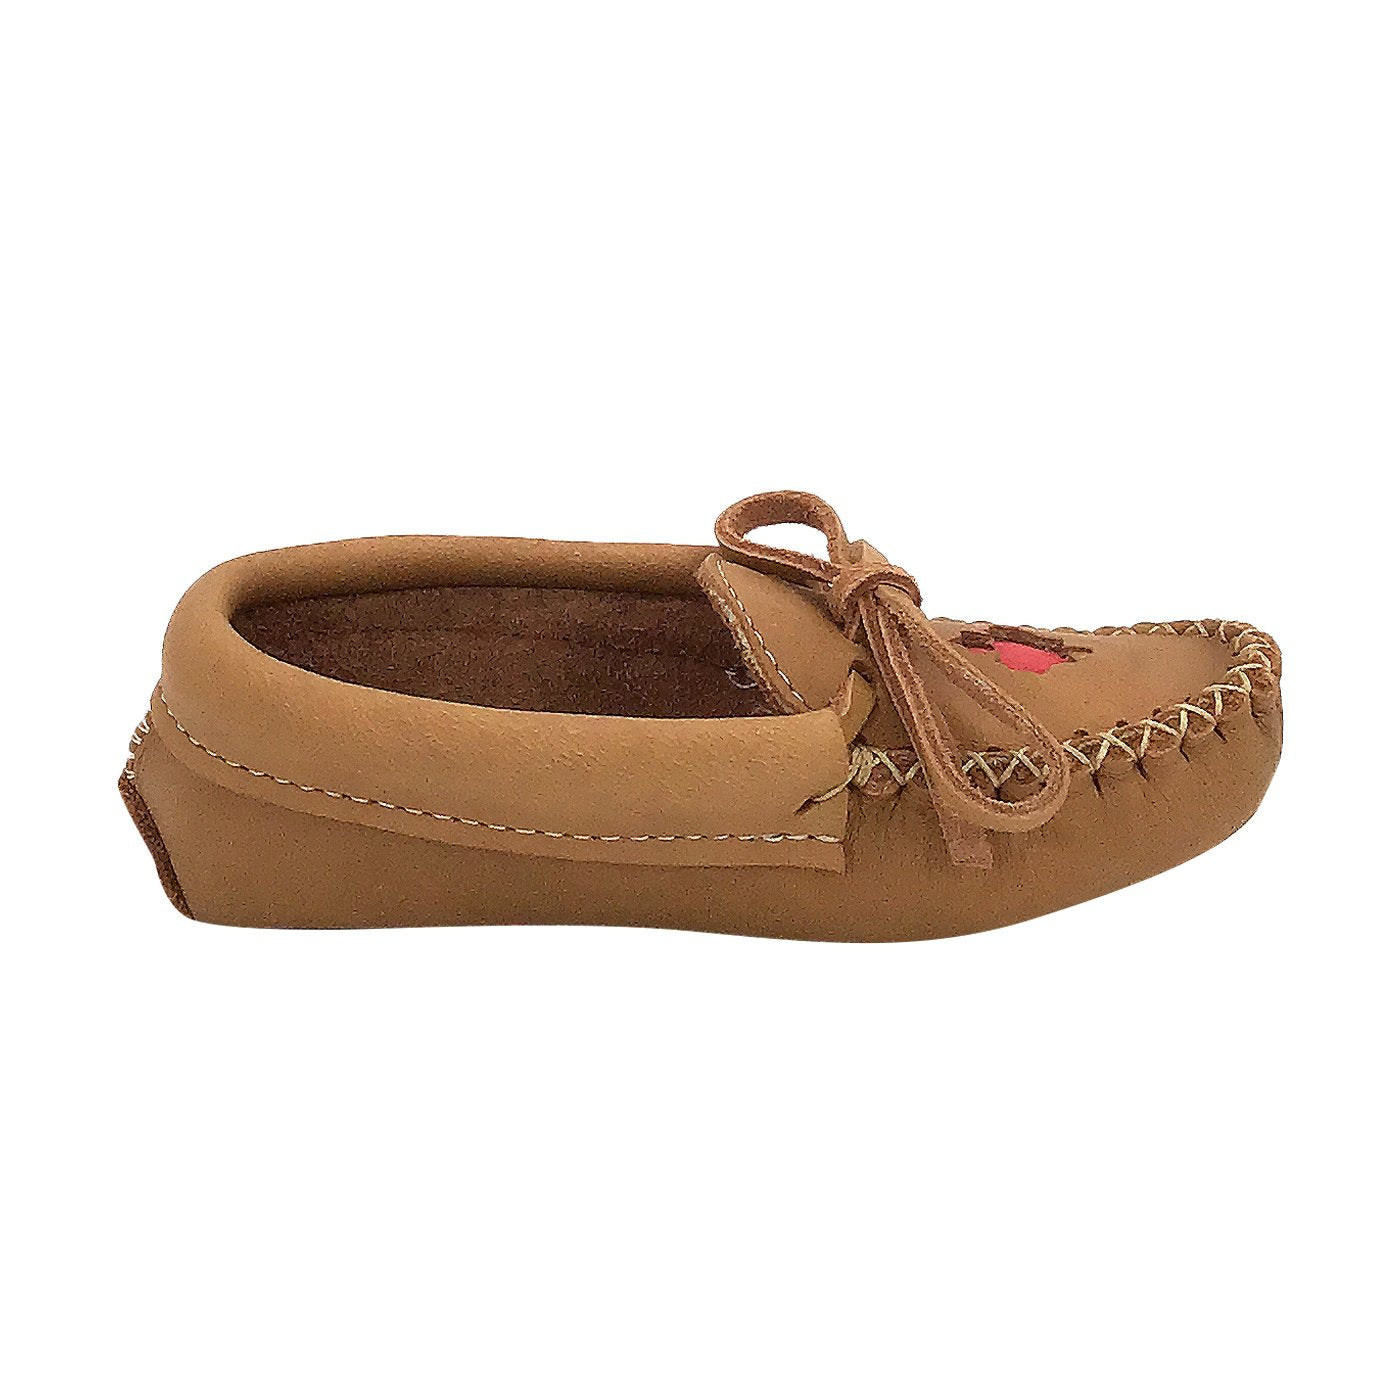 Children's Maple Leaf Moccasins (Final Clearance)